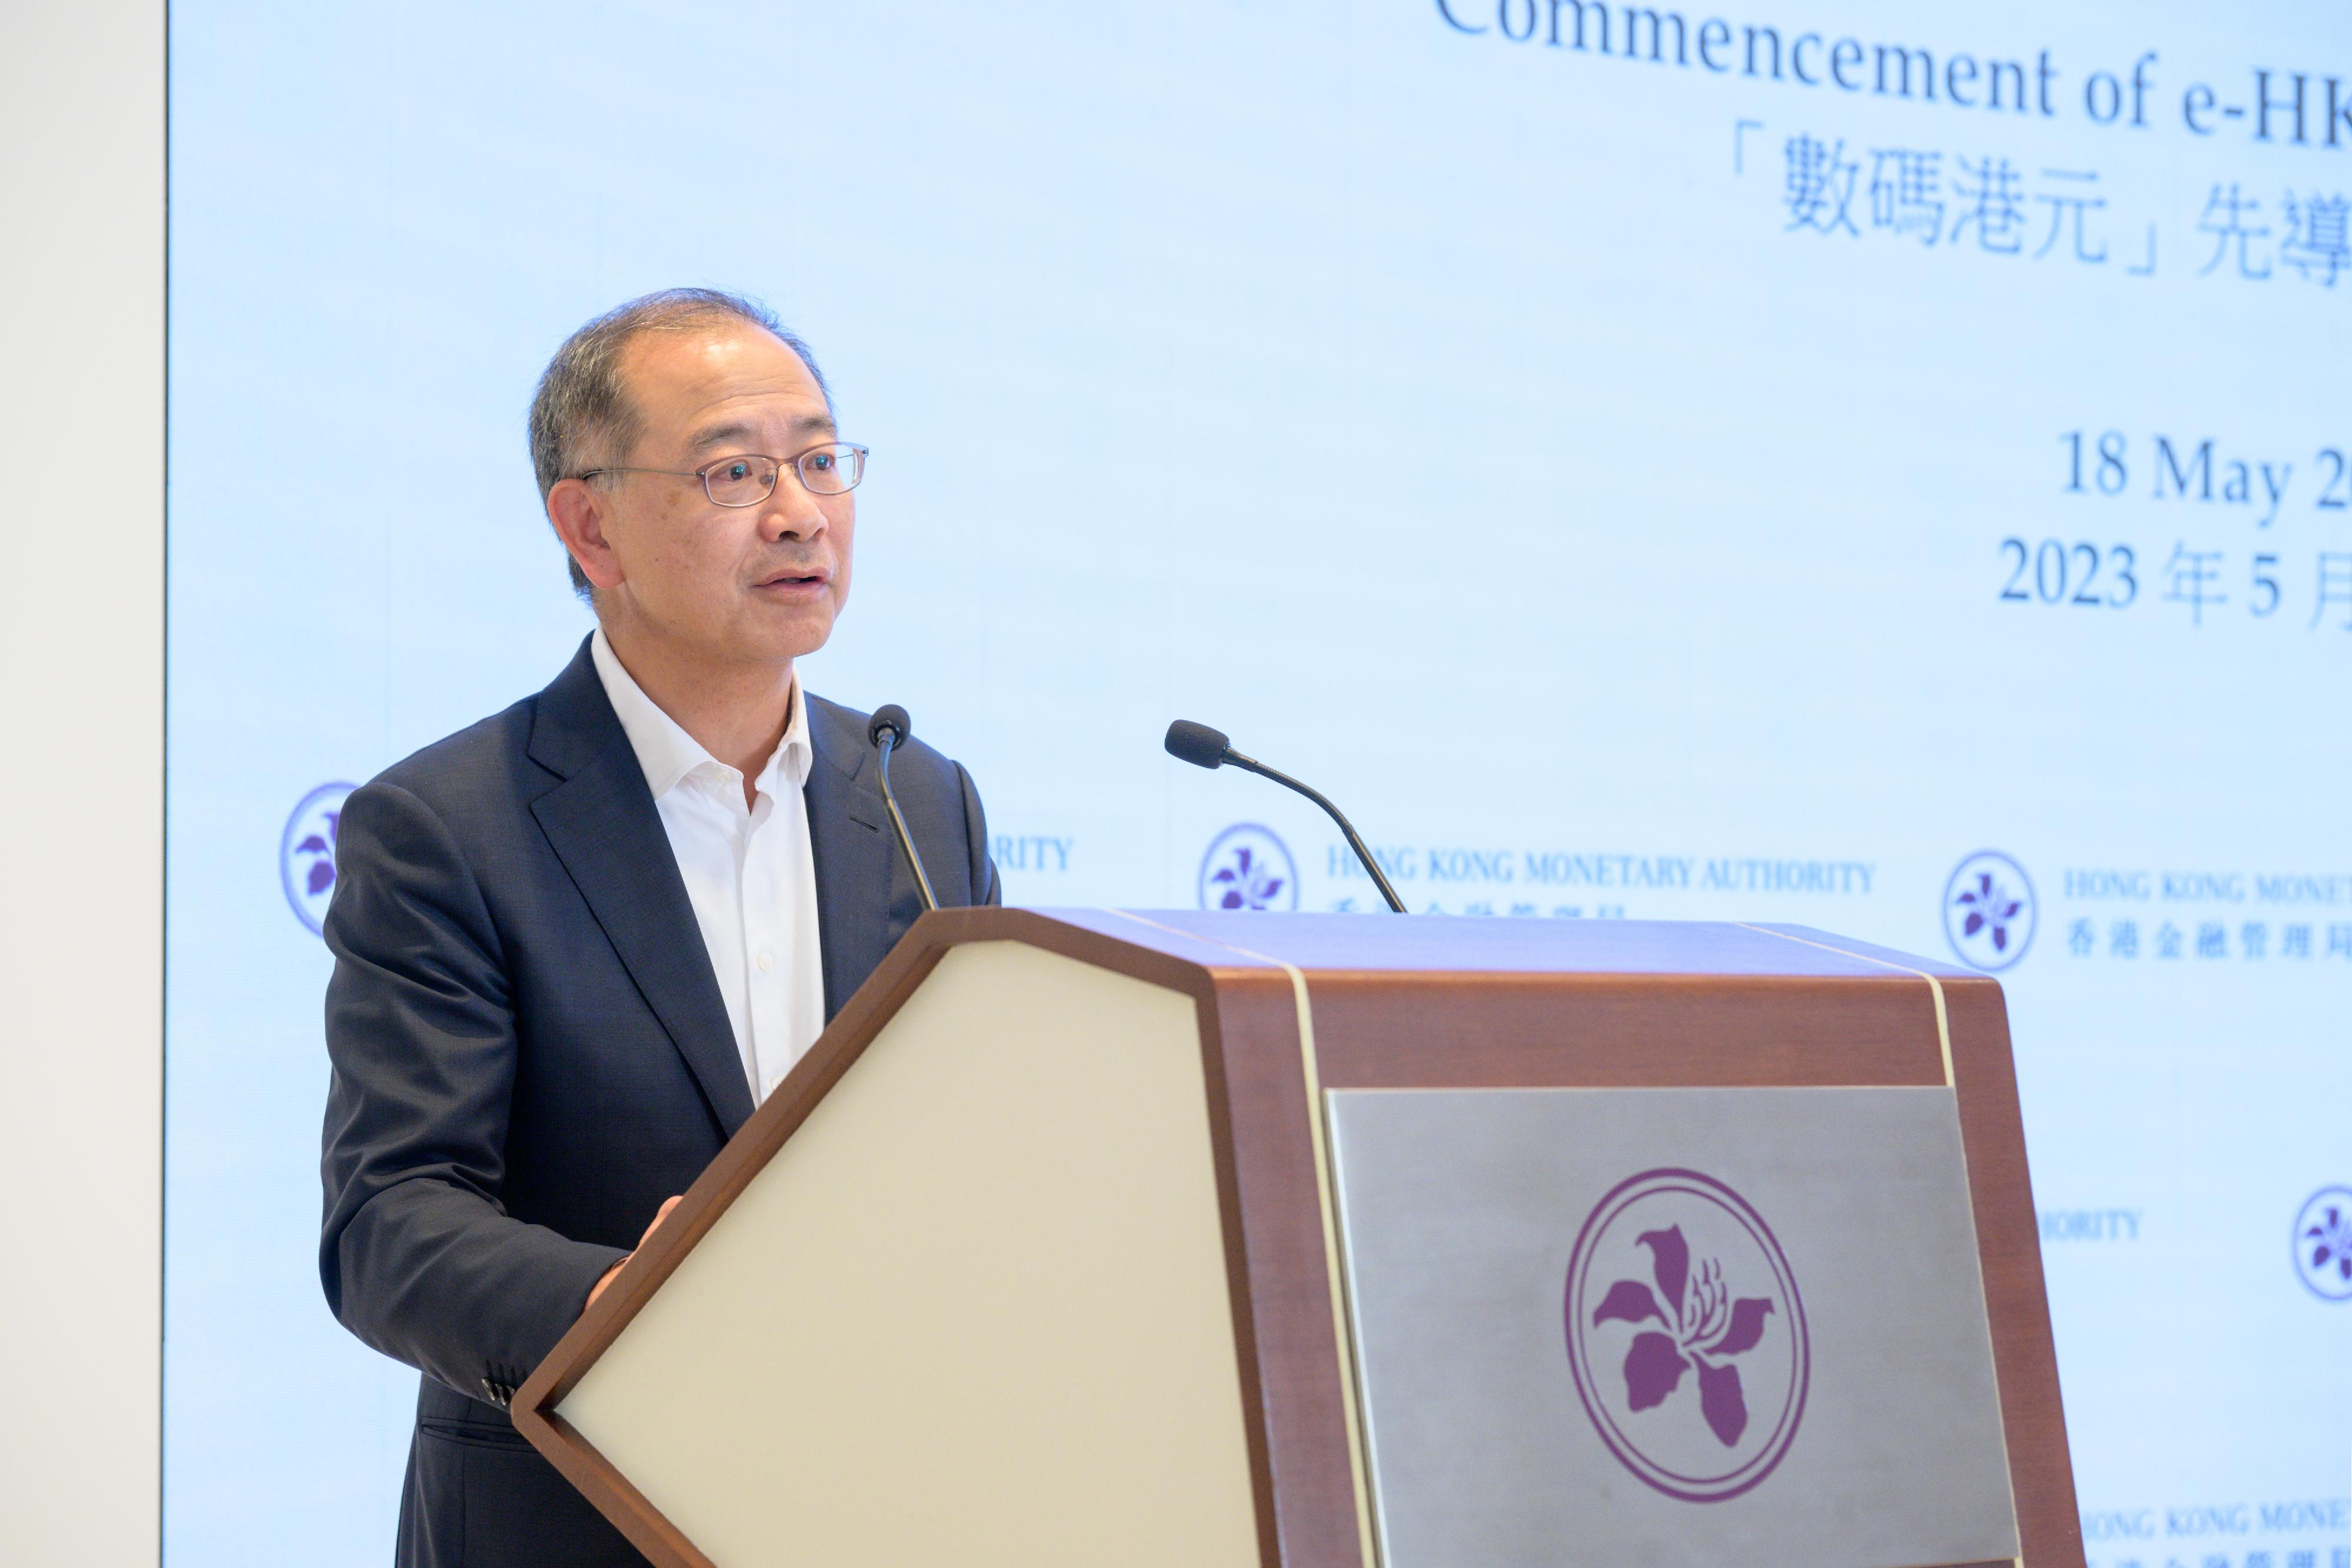 The Hong Kong Monetary Authority (HKMA) today (May 18) announced the commencement of the e-HKD Pilot Programme. Photo shows the Chief Executive of the HKMA, Mr Eddie Yue, giving opening remarks at the commencement event of the e-HKD Pilot Programme.